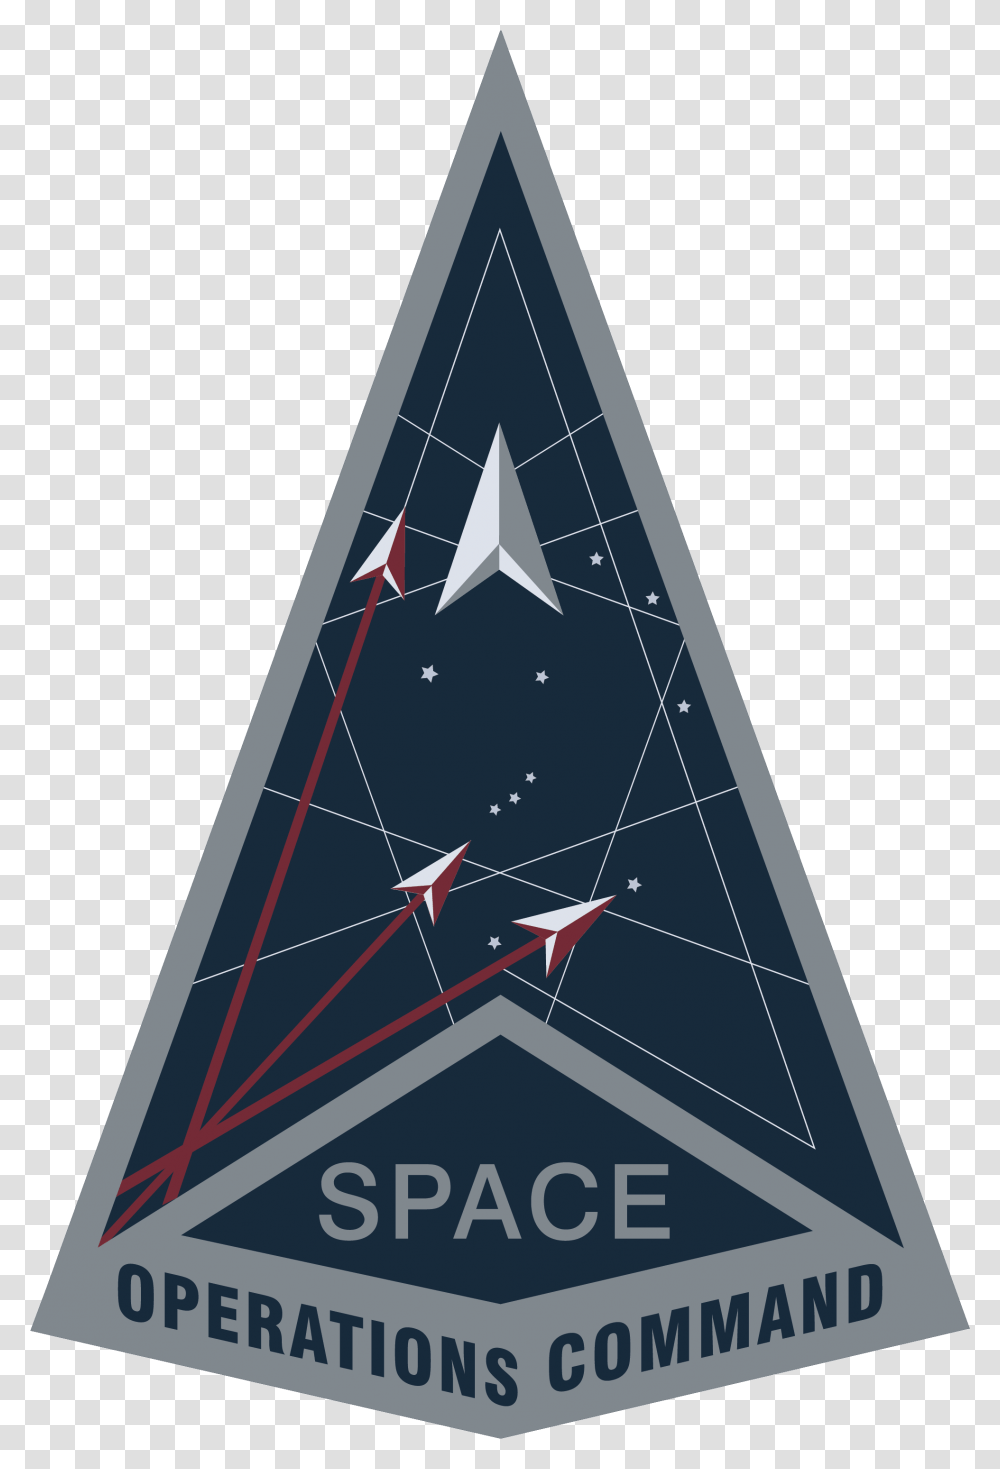 United States Space Force Wikiwand Space Operations Command Logo, Triangle Transparent Png